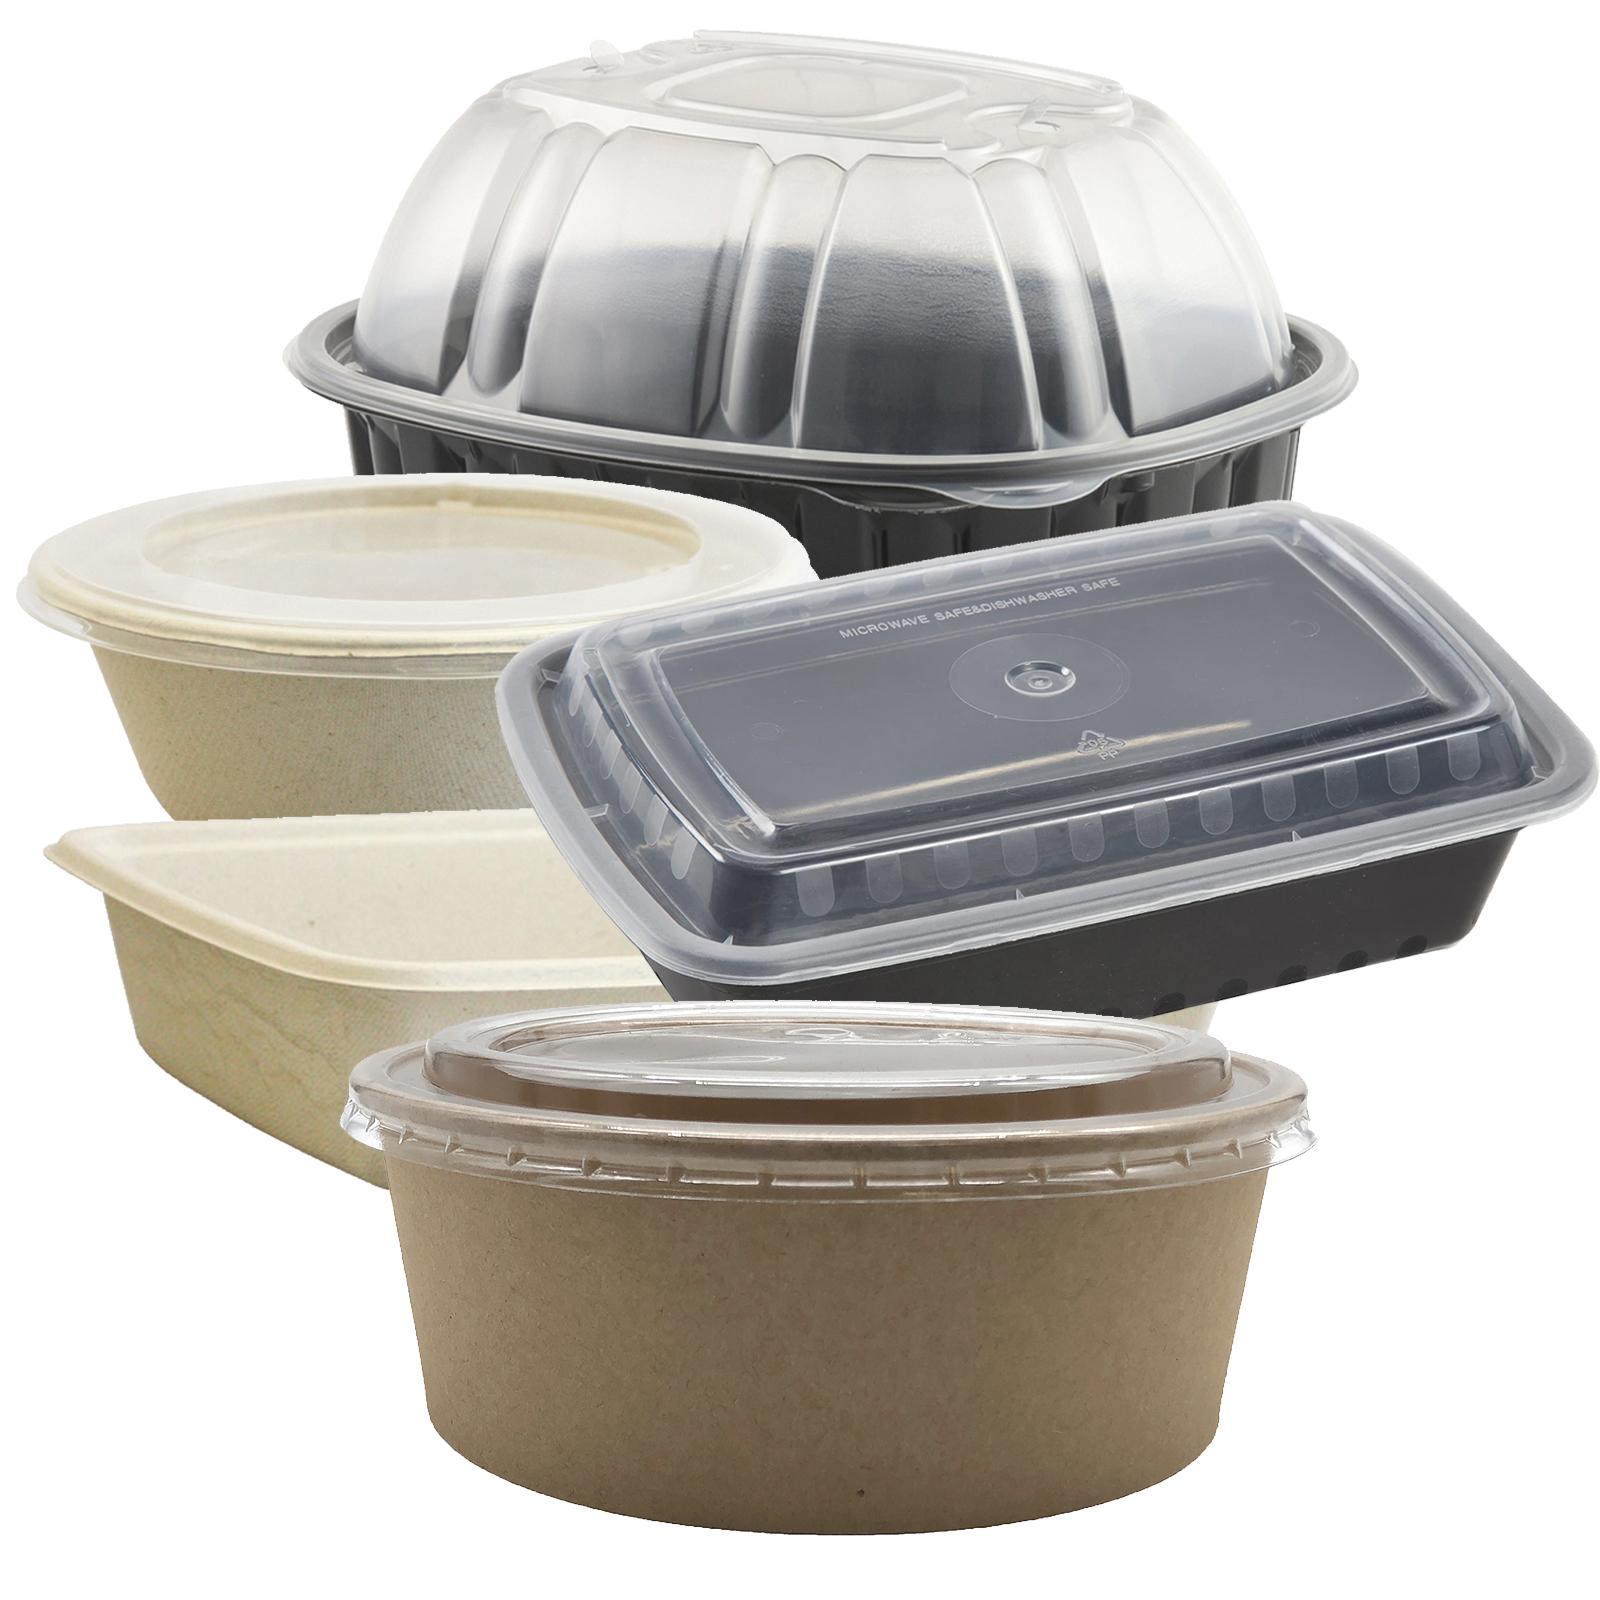 Wholesale Microwave, Oven Safe Takeout Containers for Restaurants